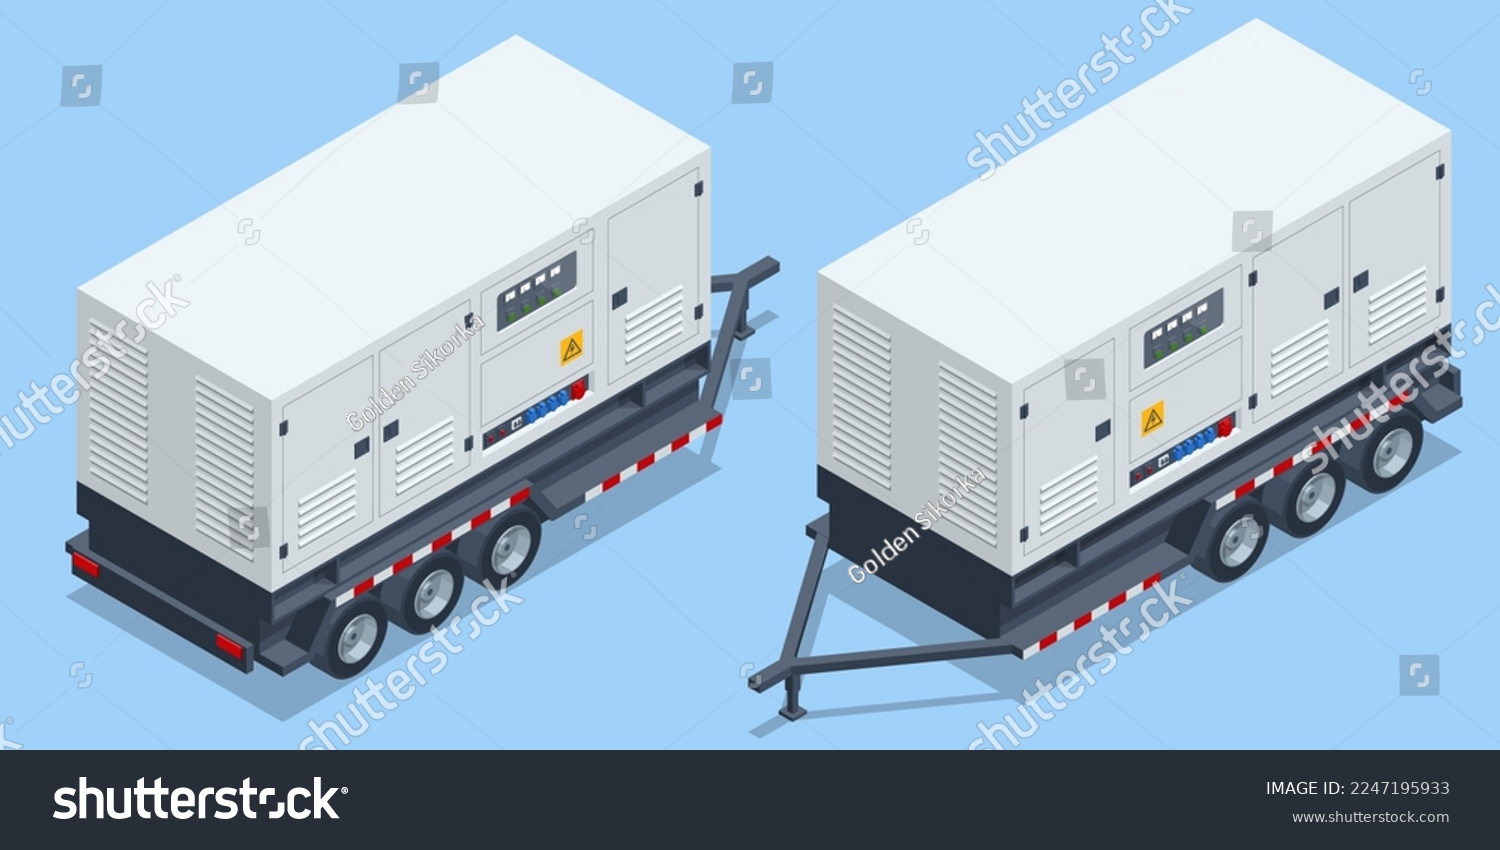 SVG of Isometric Generator trailer, Industrial Power Generators isolated on white background 3d vector illustration. Industrial Diesel Generator. Standby generator. svg